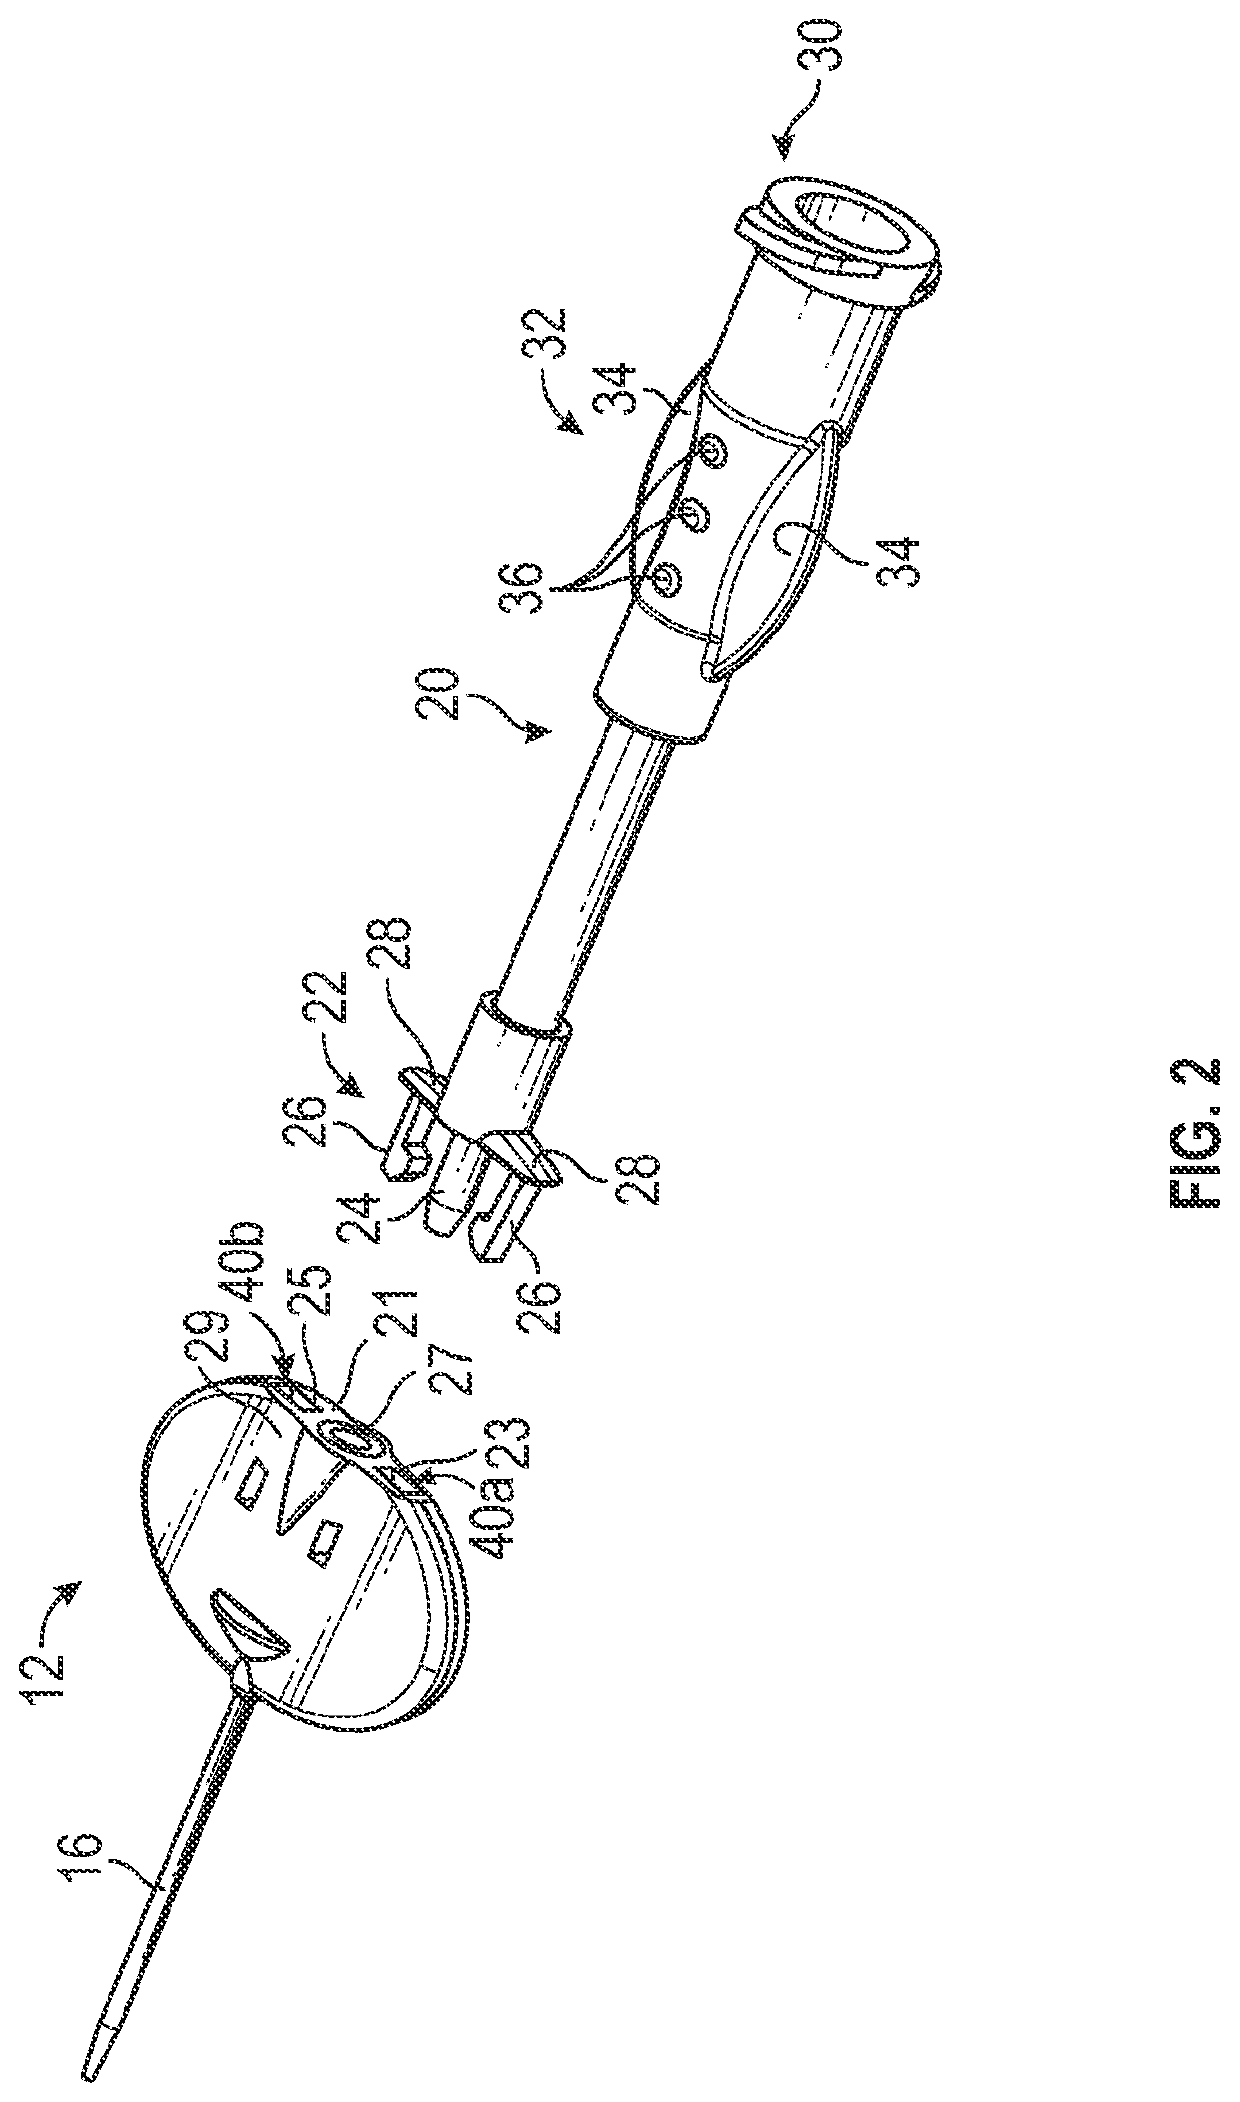 Low-profile extension for a catheter assembly